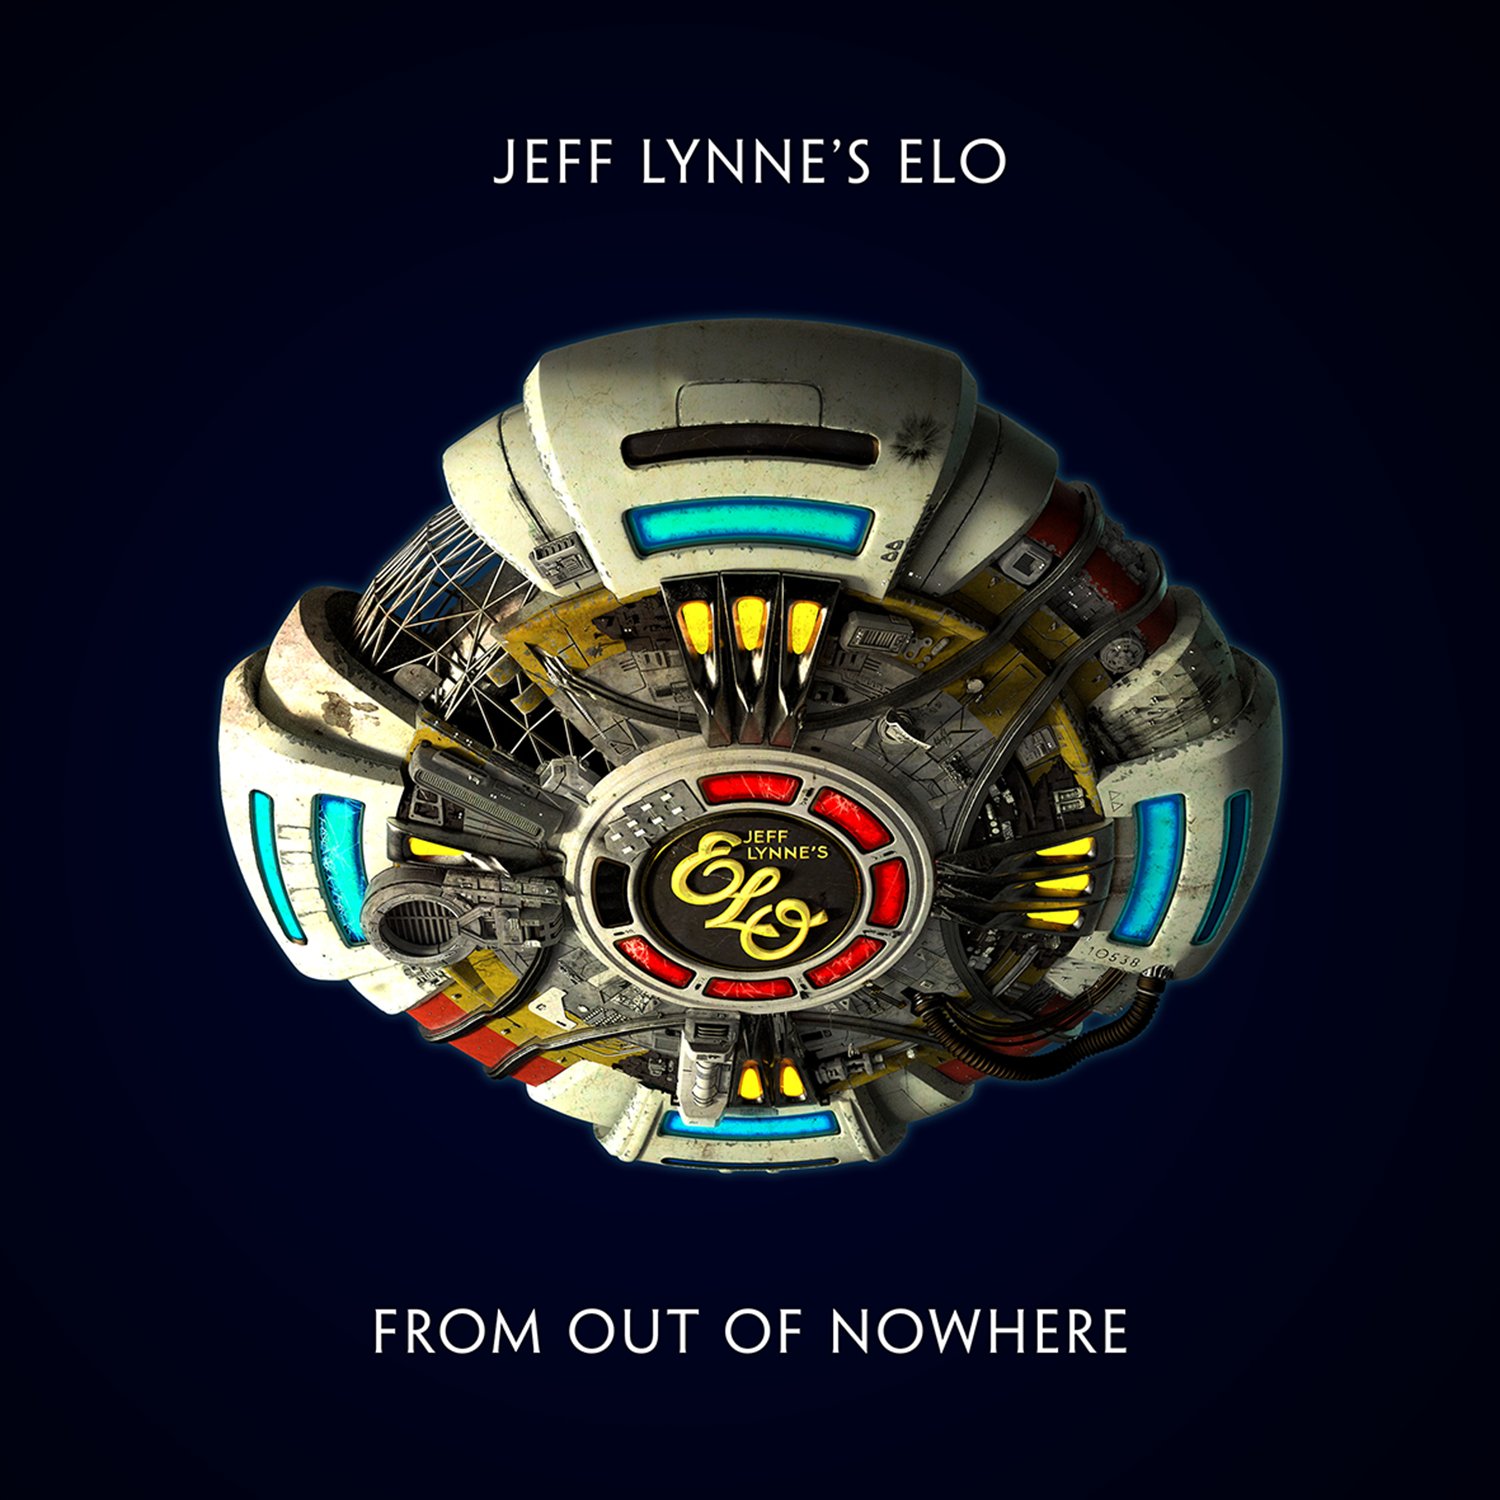 Jeff Lynne's ELO - From Out of Nowhere Vinyl